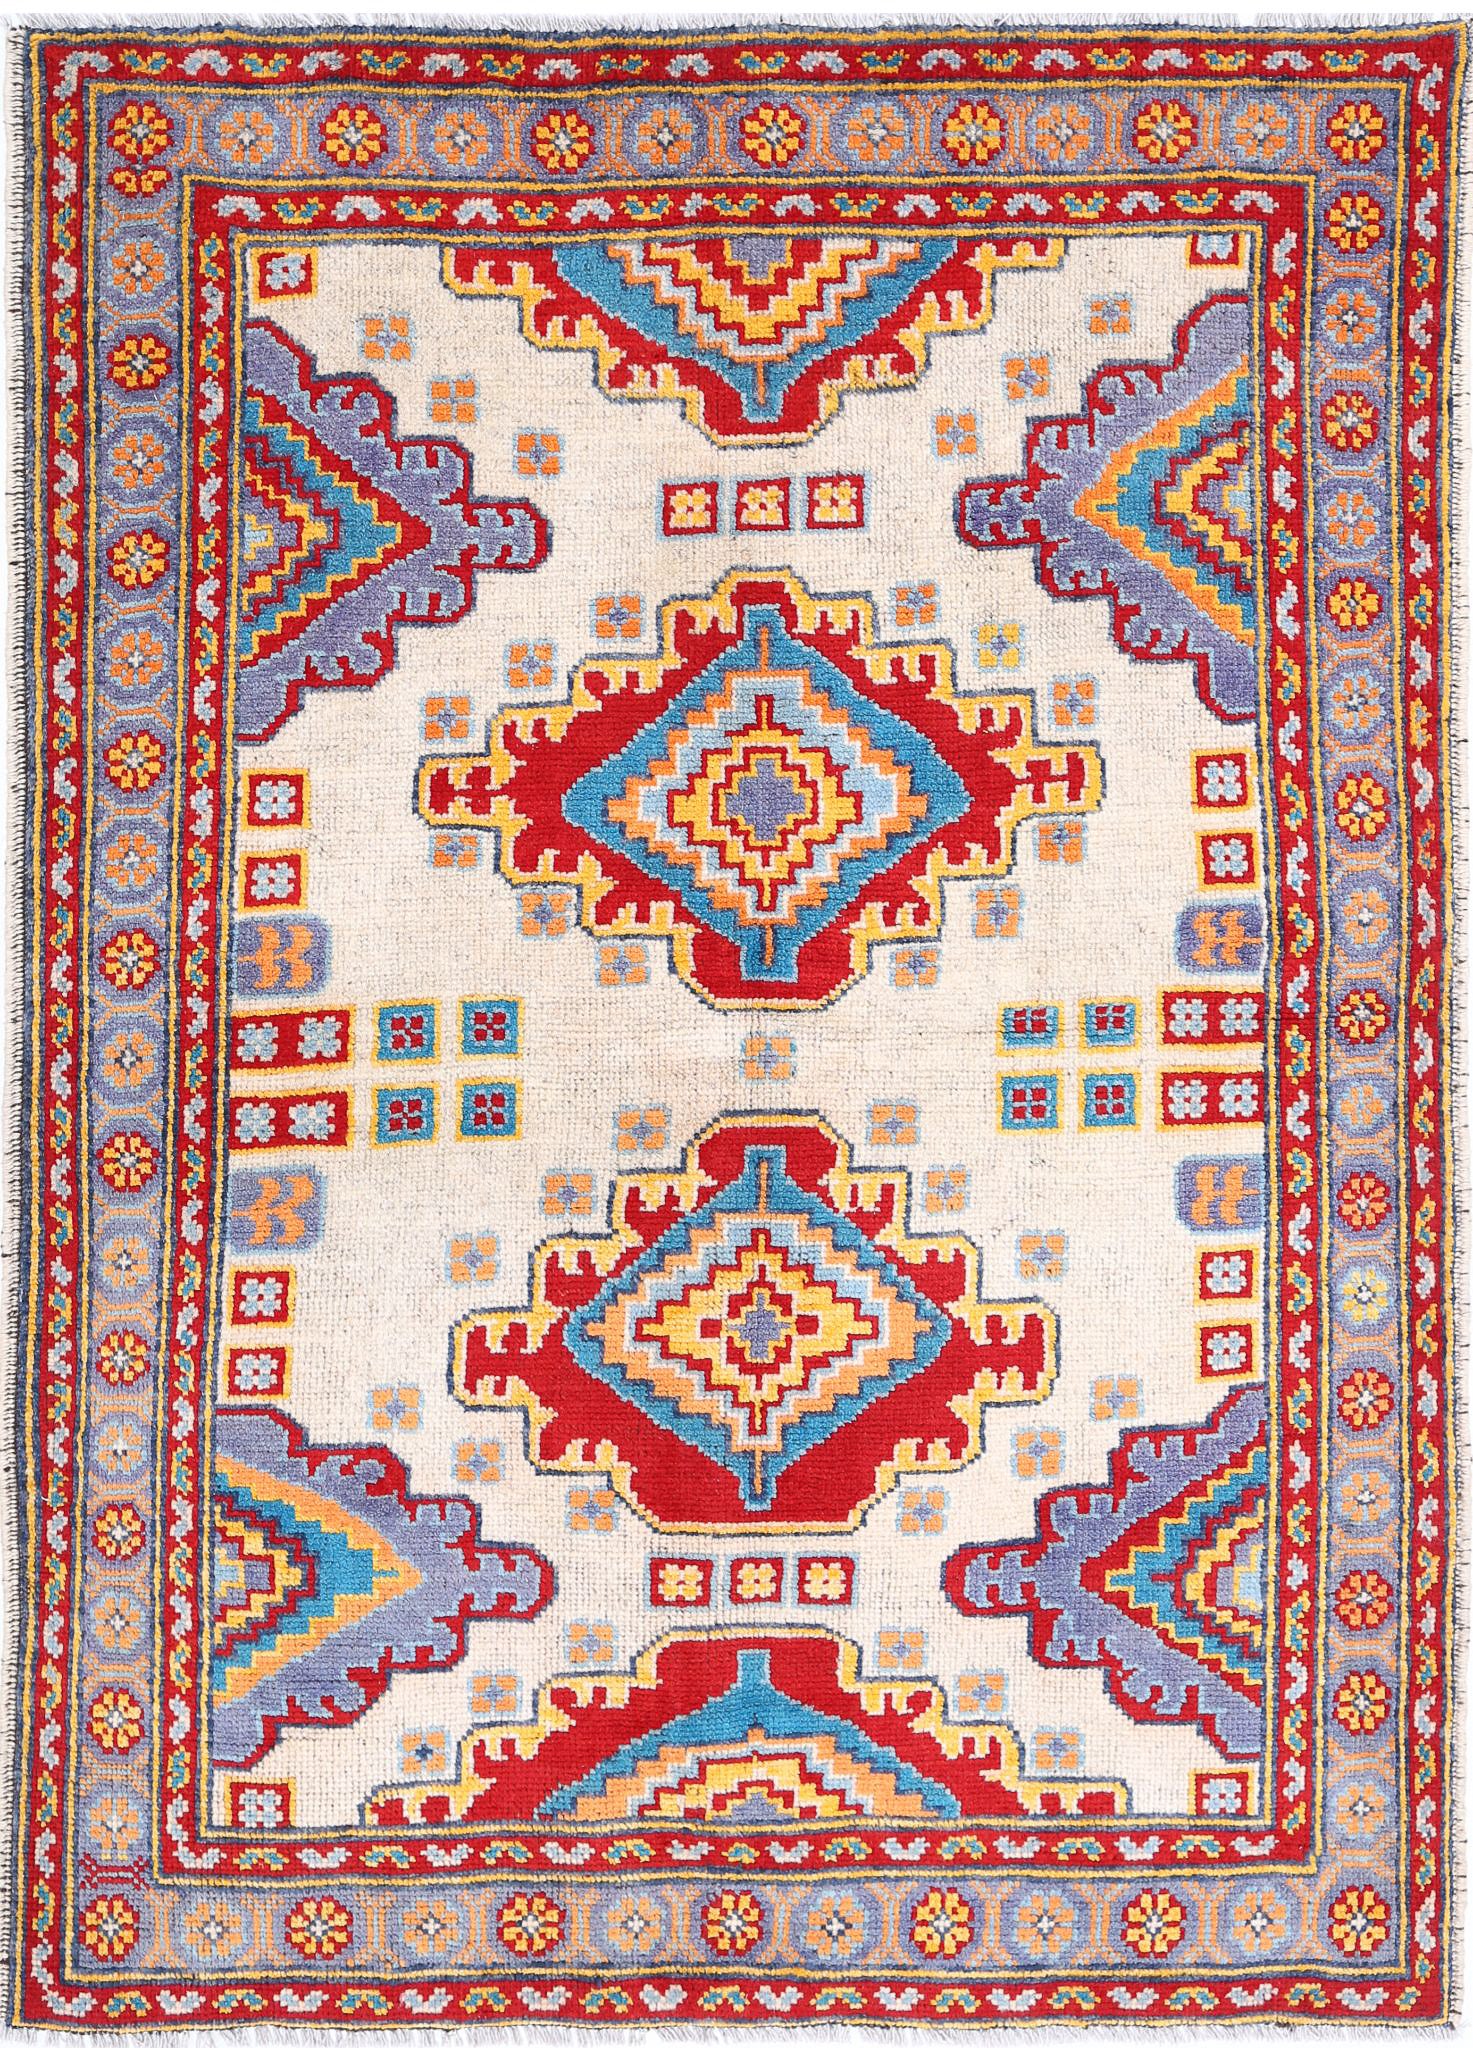 Revival-hand-knotted-qarghani-wool-rug-5014211.jpg